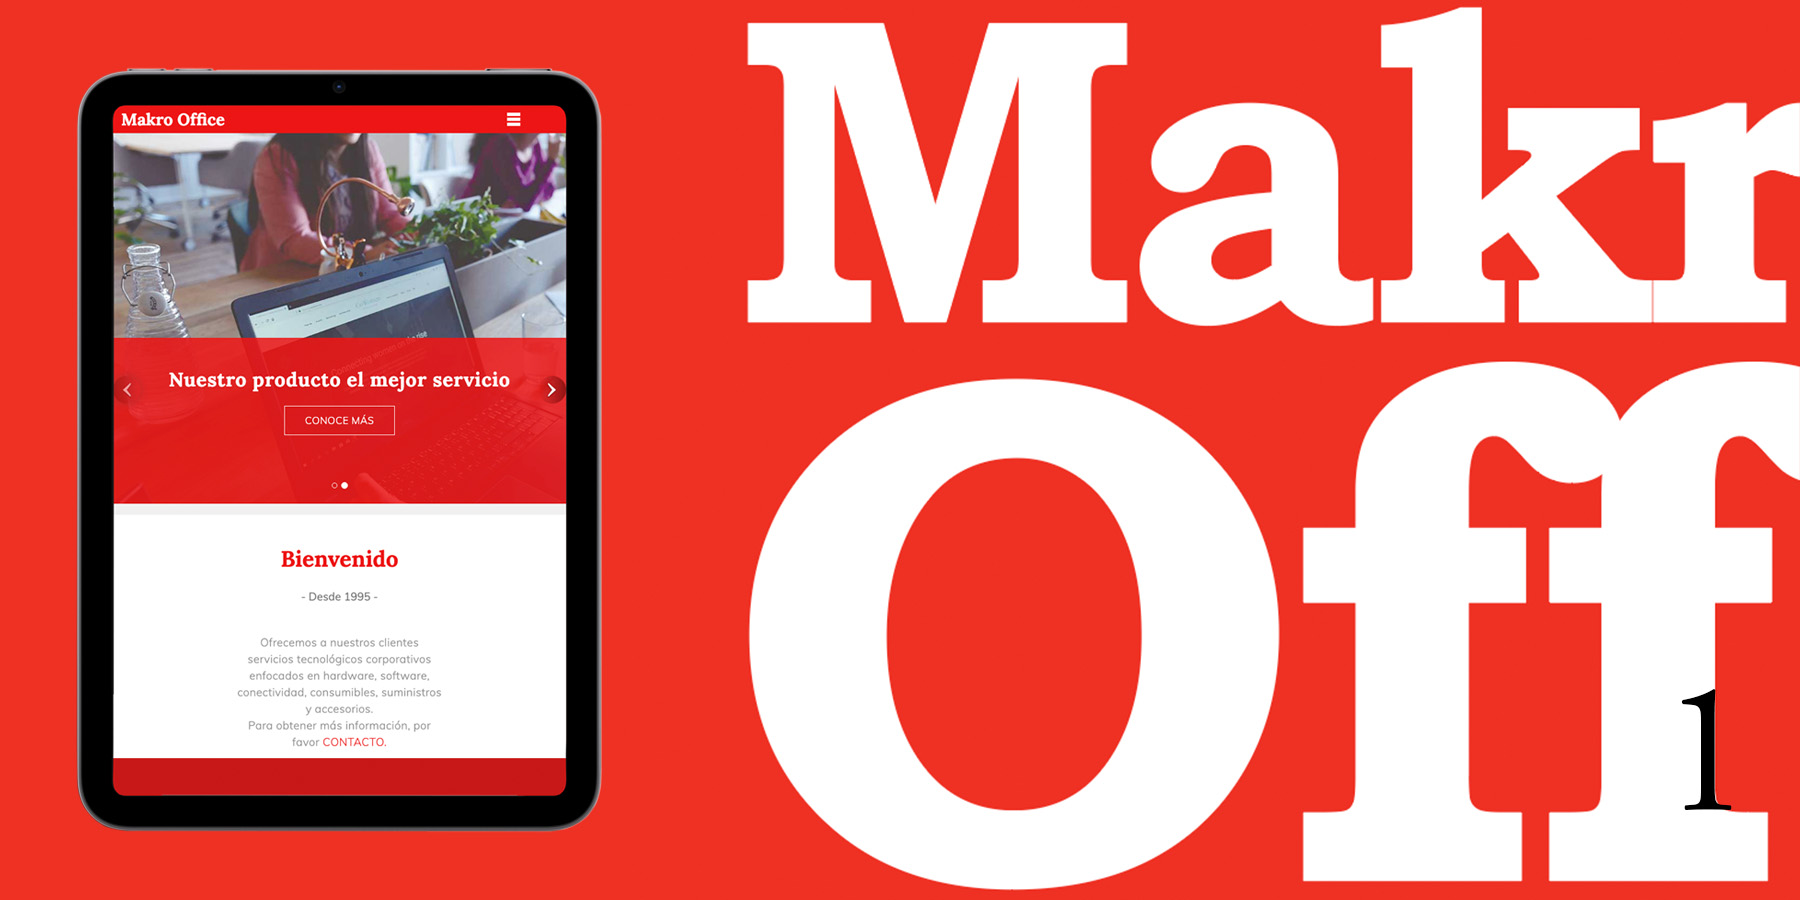 Makro Office's website shown on a tablet along with some typographic composition.